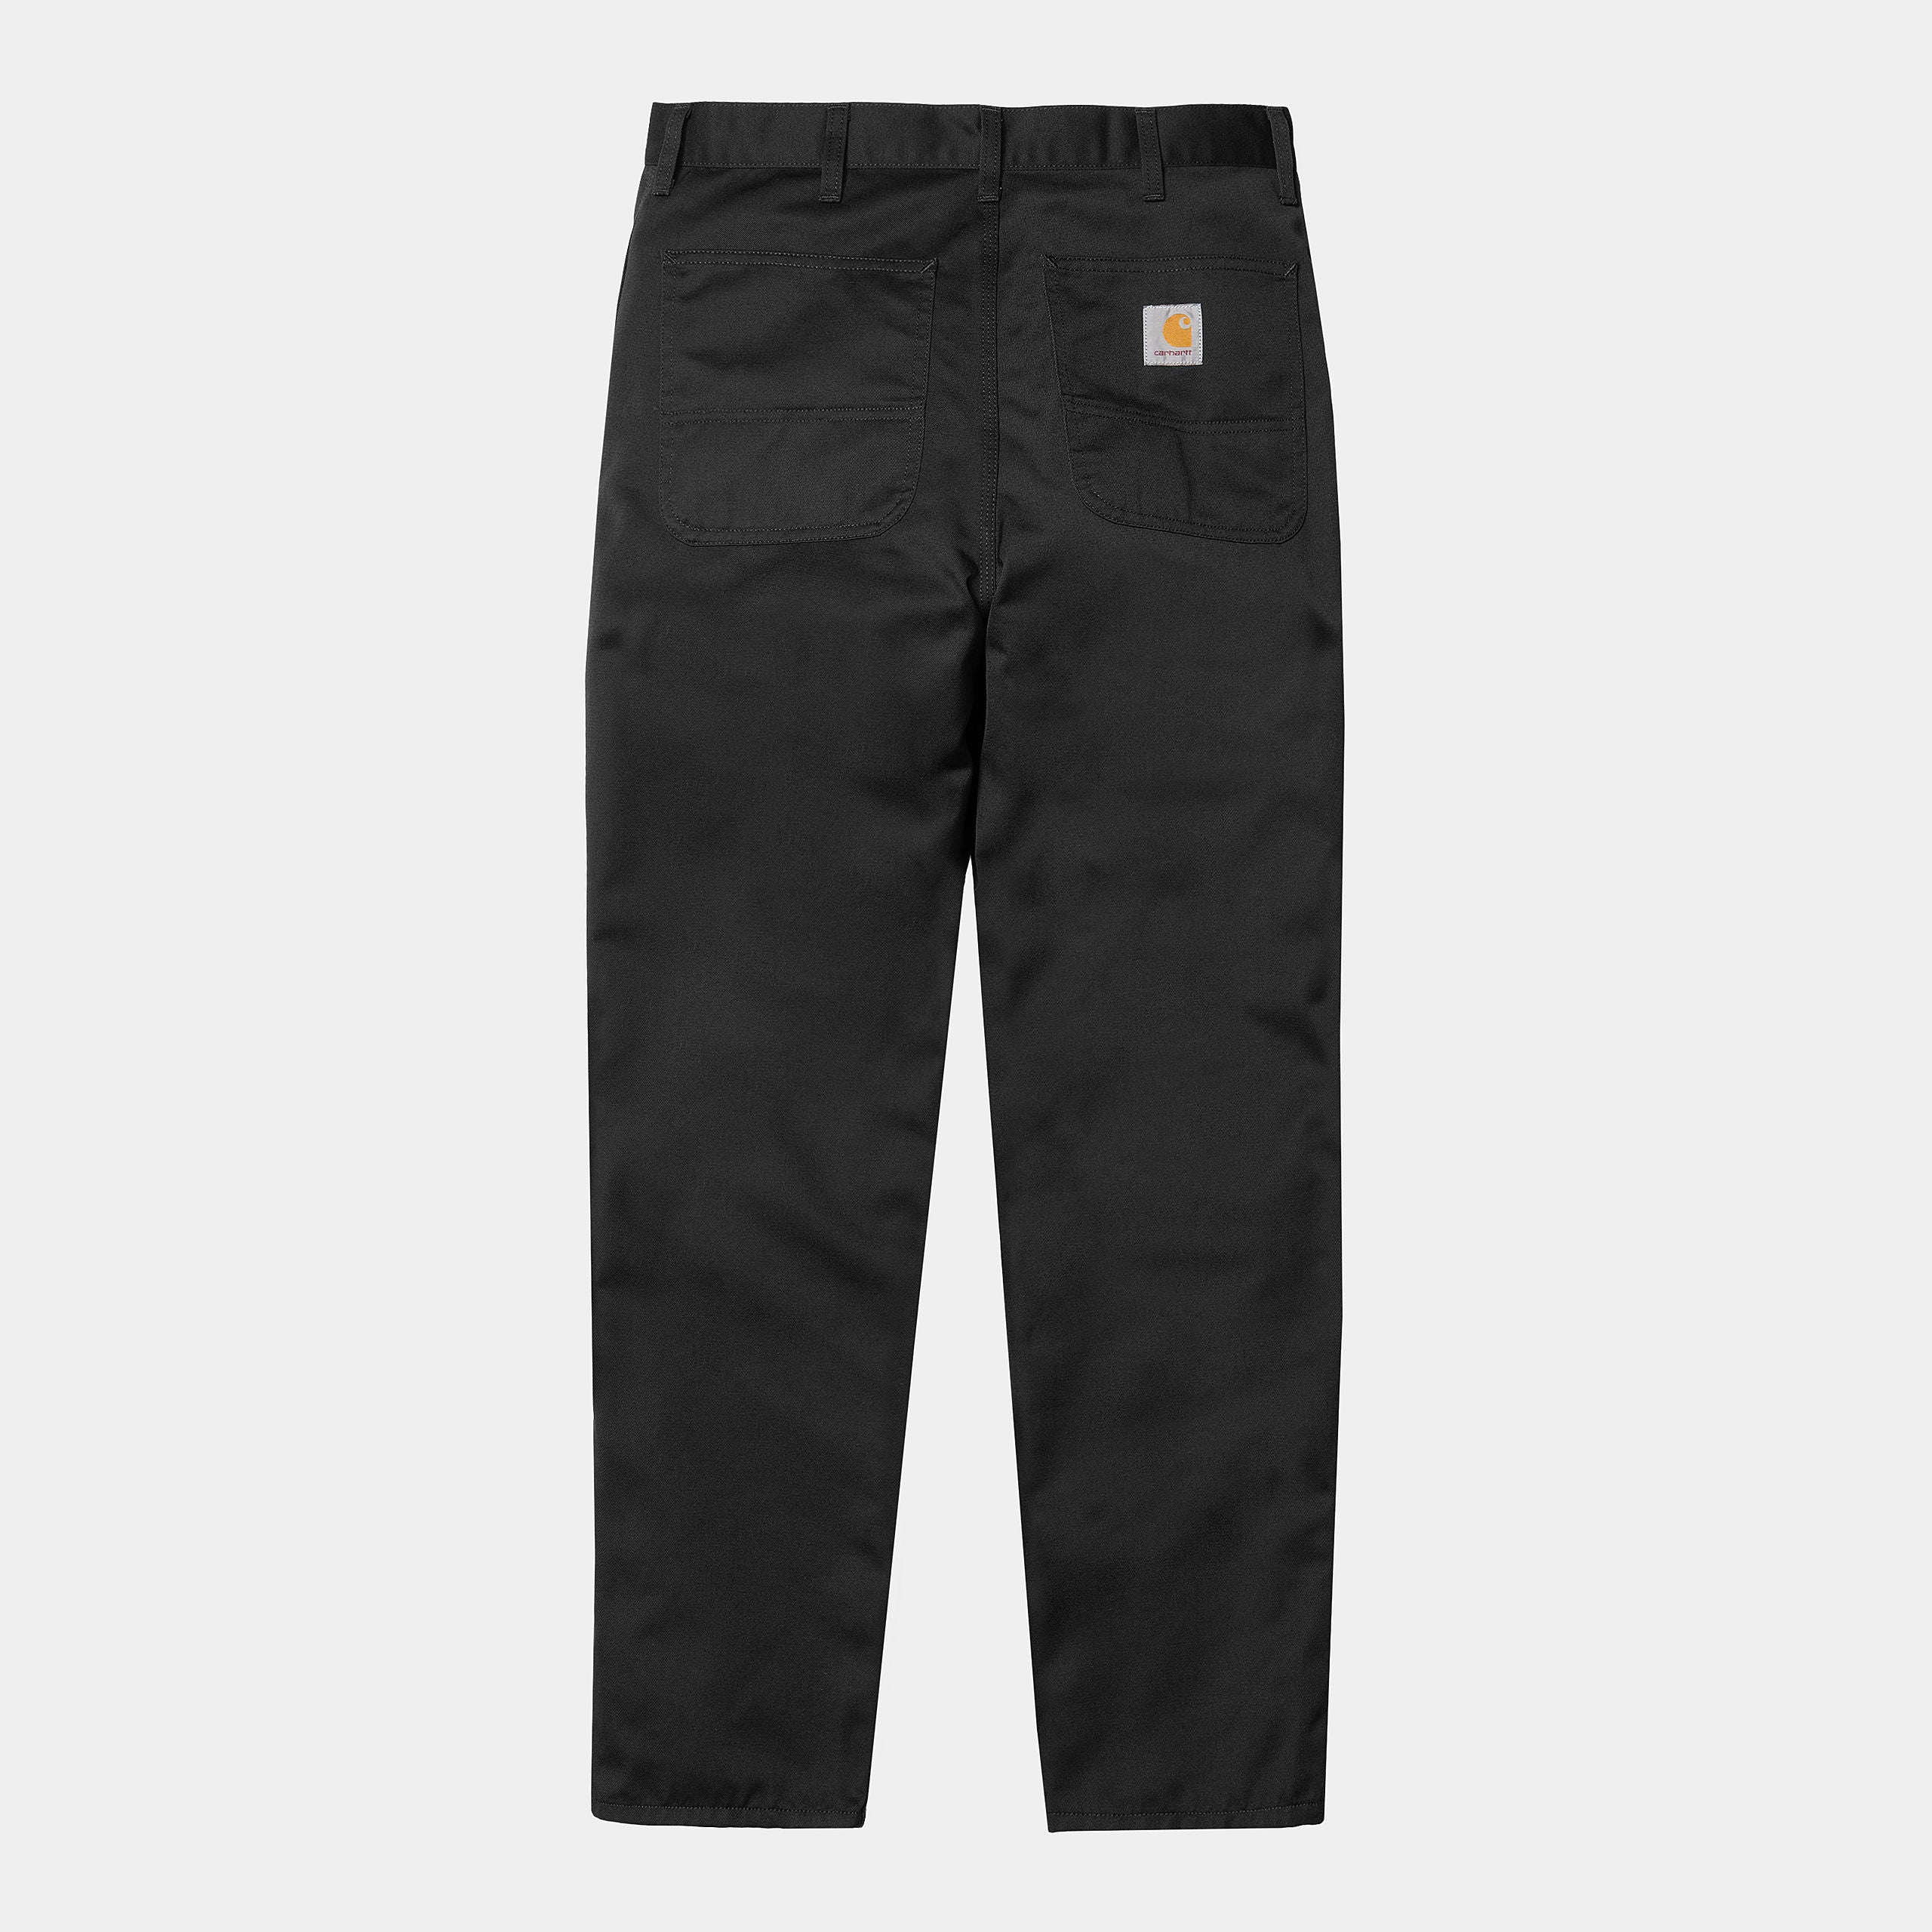 Carhartt Wip Simple Pant Polyester/cotton Denison Twill, 8.8 Oz Black Rinsed Uomo